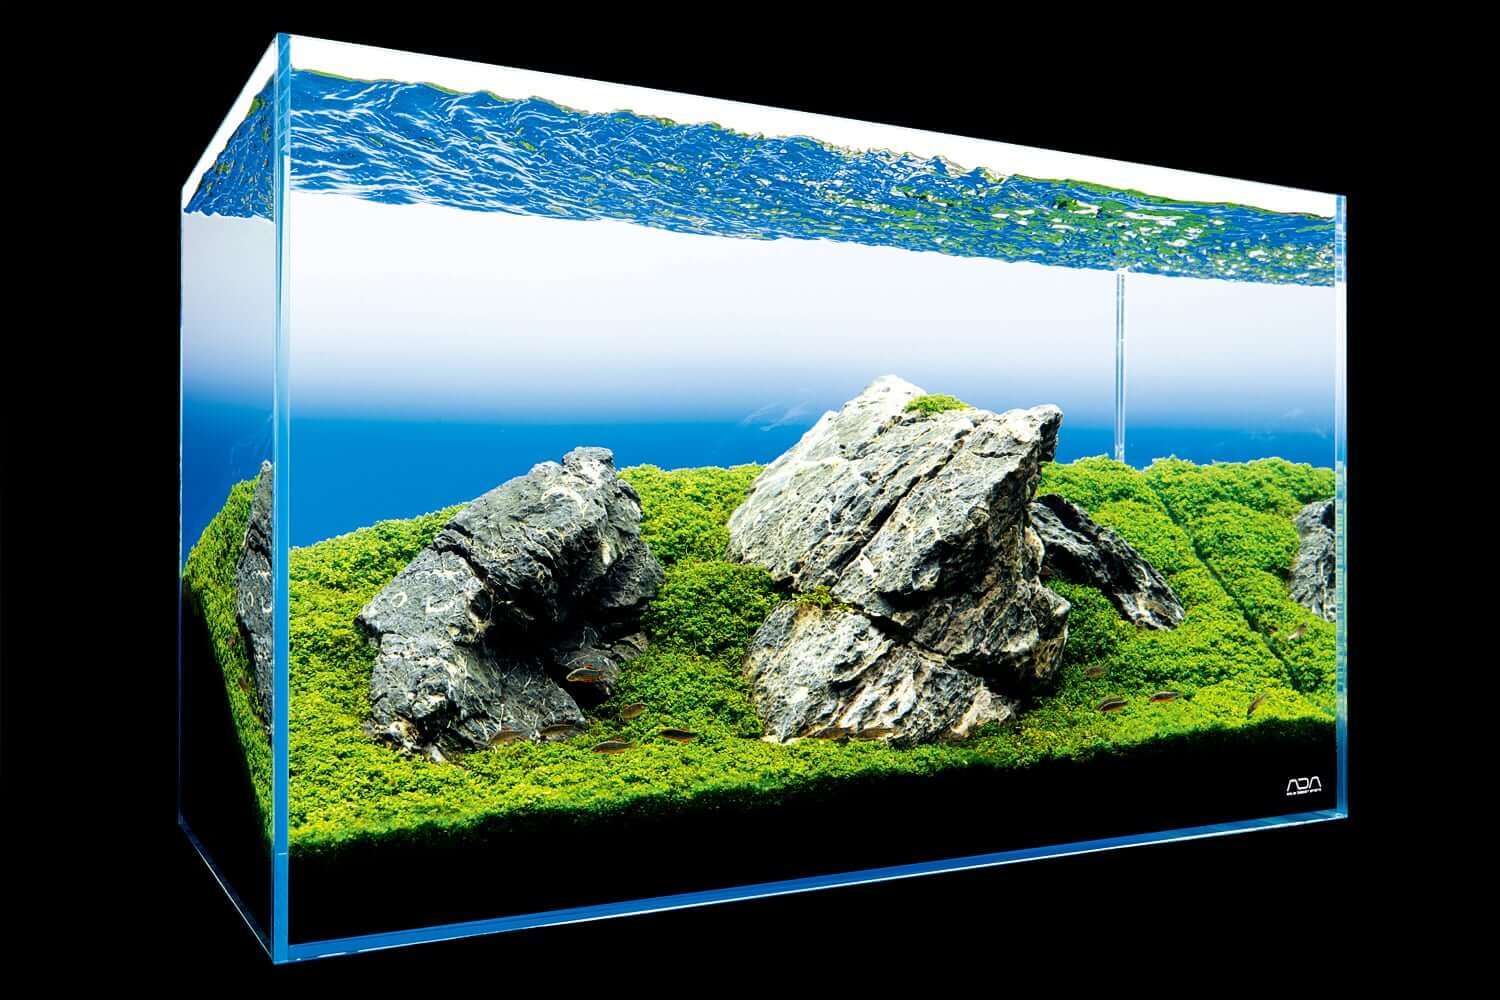 A Guide to Aquascaping and Choosing the Right Aquarium Plants by